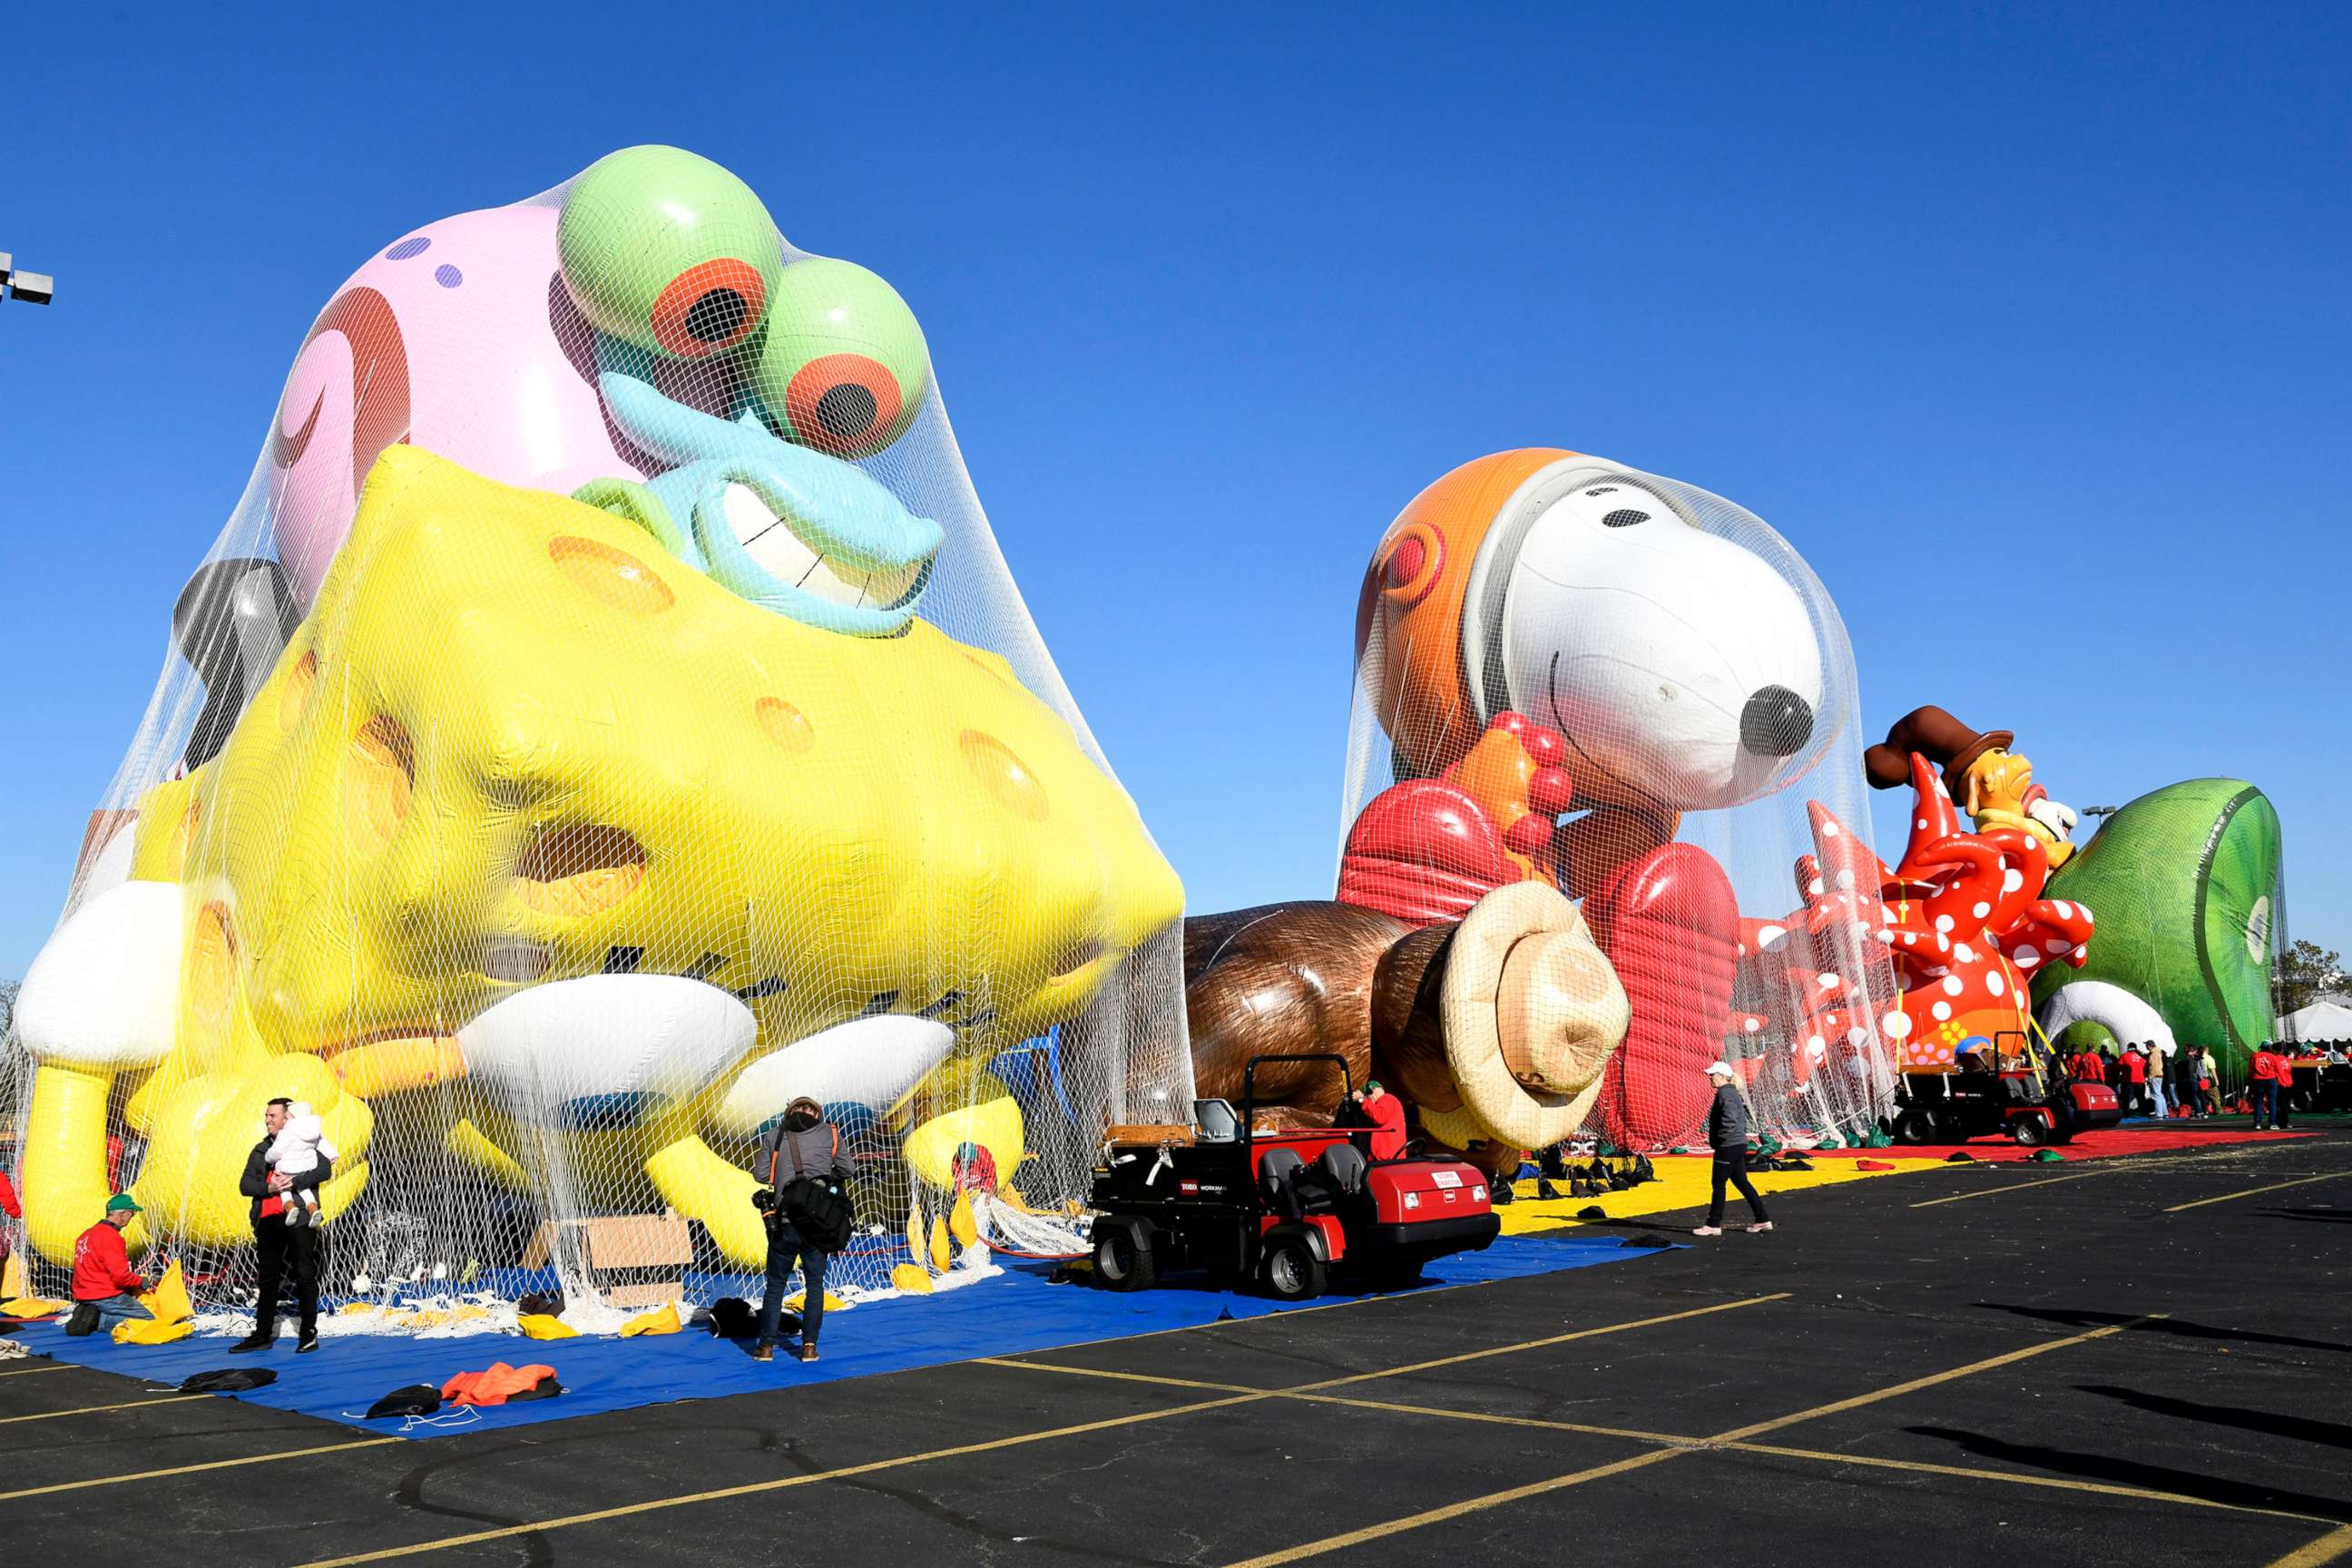 PHOTO: The balloons are seen being inflated as Macy's unveils new giant character balloons for the 93rd annual Macy's Thanksgiving Day Parade at MetLife Stadium, Nov. 2, 2019 in East Rutherford, N.J. 